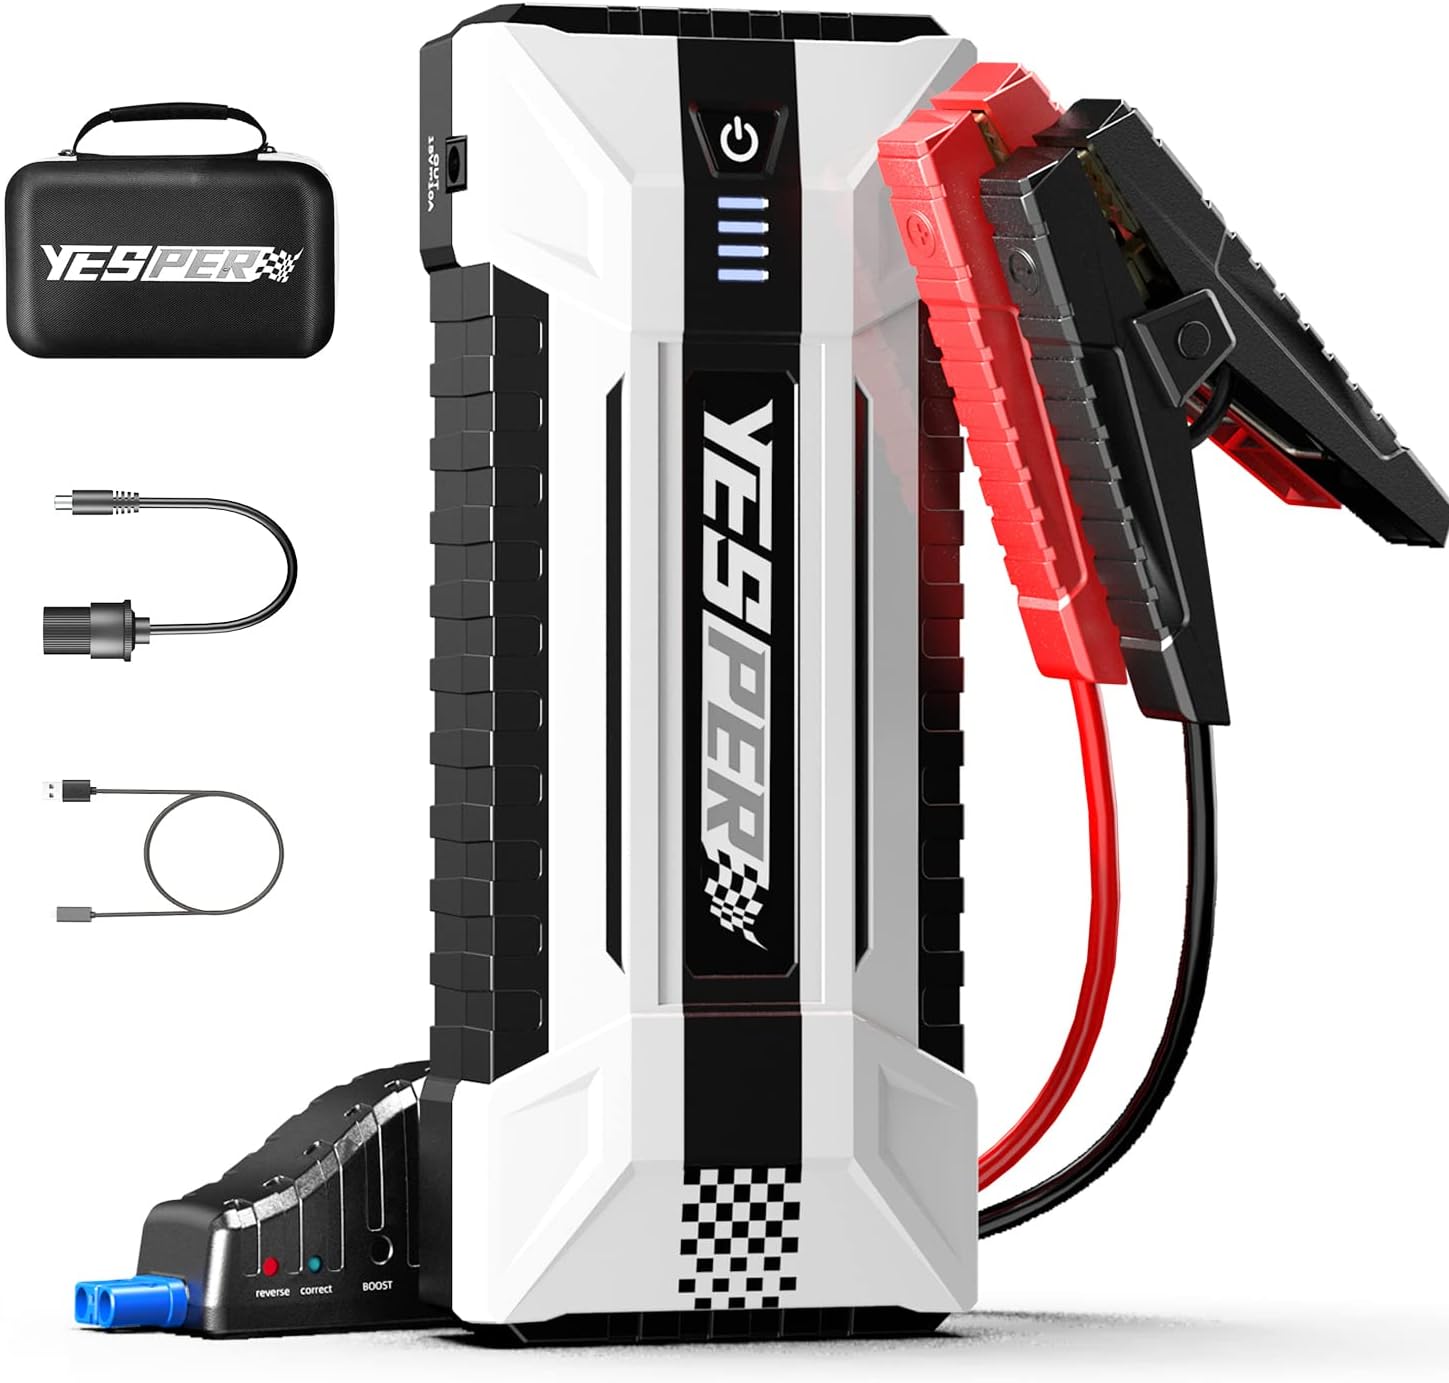 THE YESPER YJS40 CAR JUMP STARTER front view